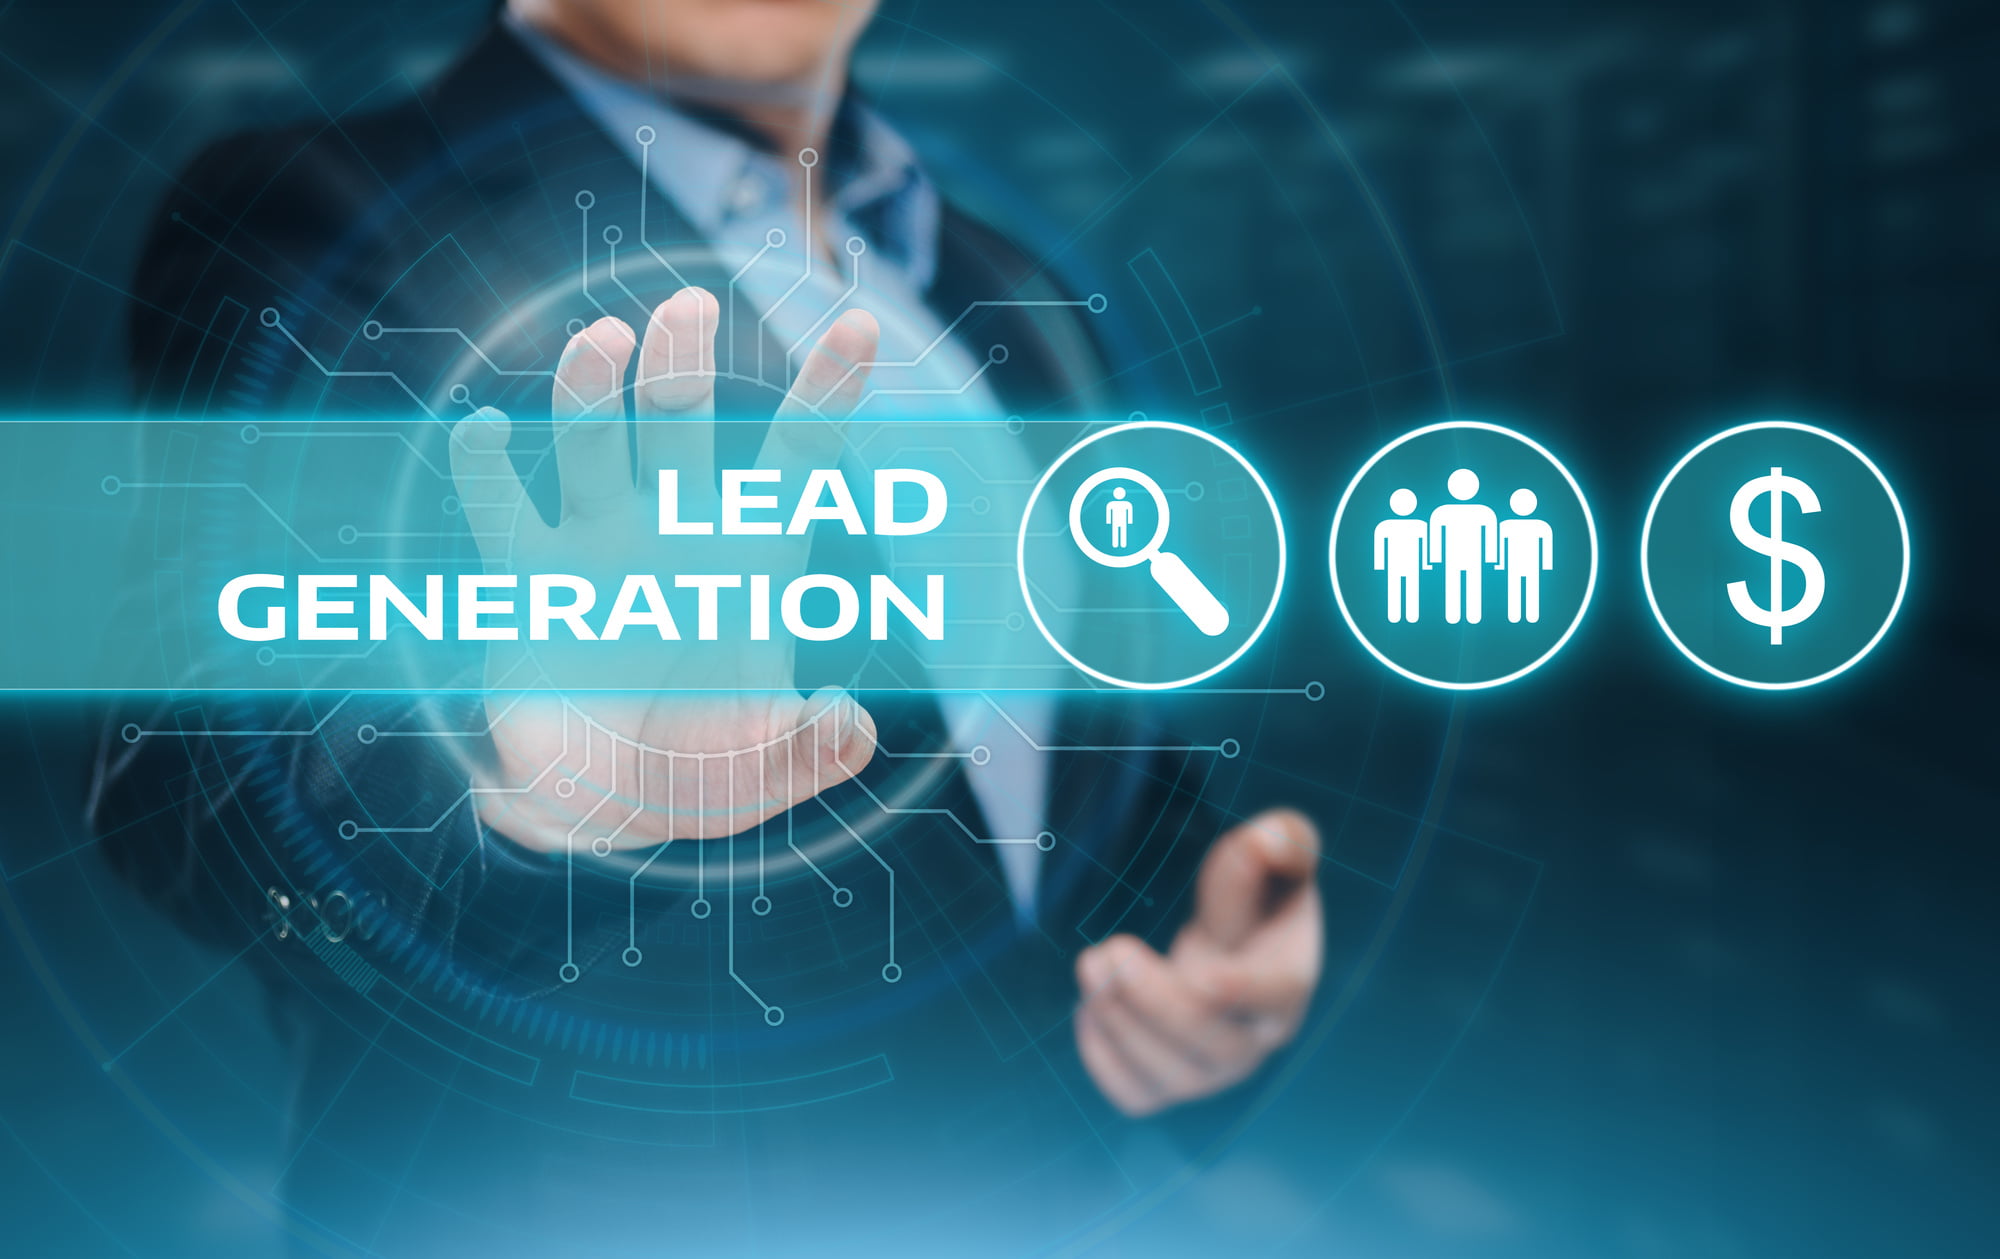 Managing leads for your business properly requires knowing what can hinder your progress. Here are common lead management mistakes and how to avoid them.